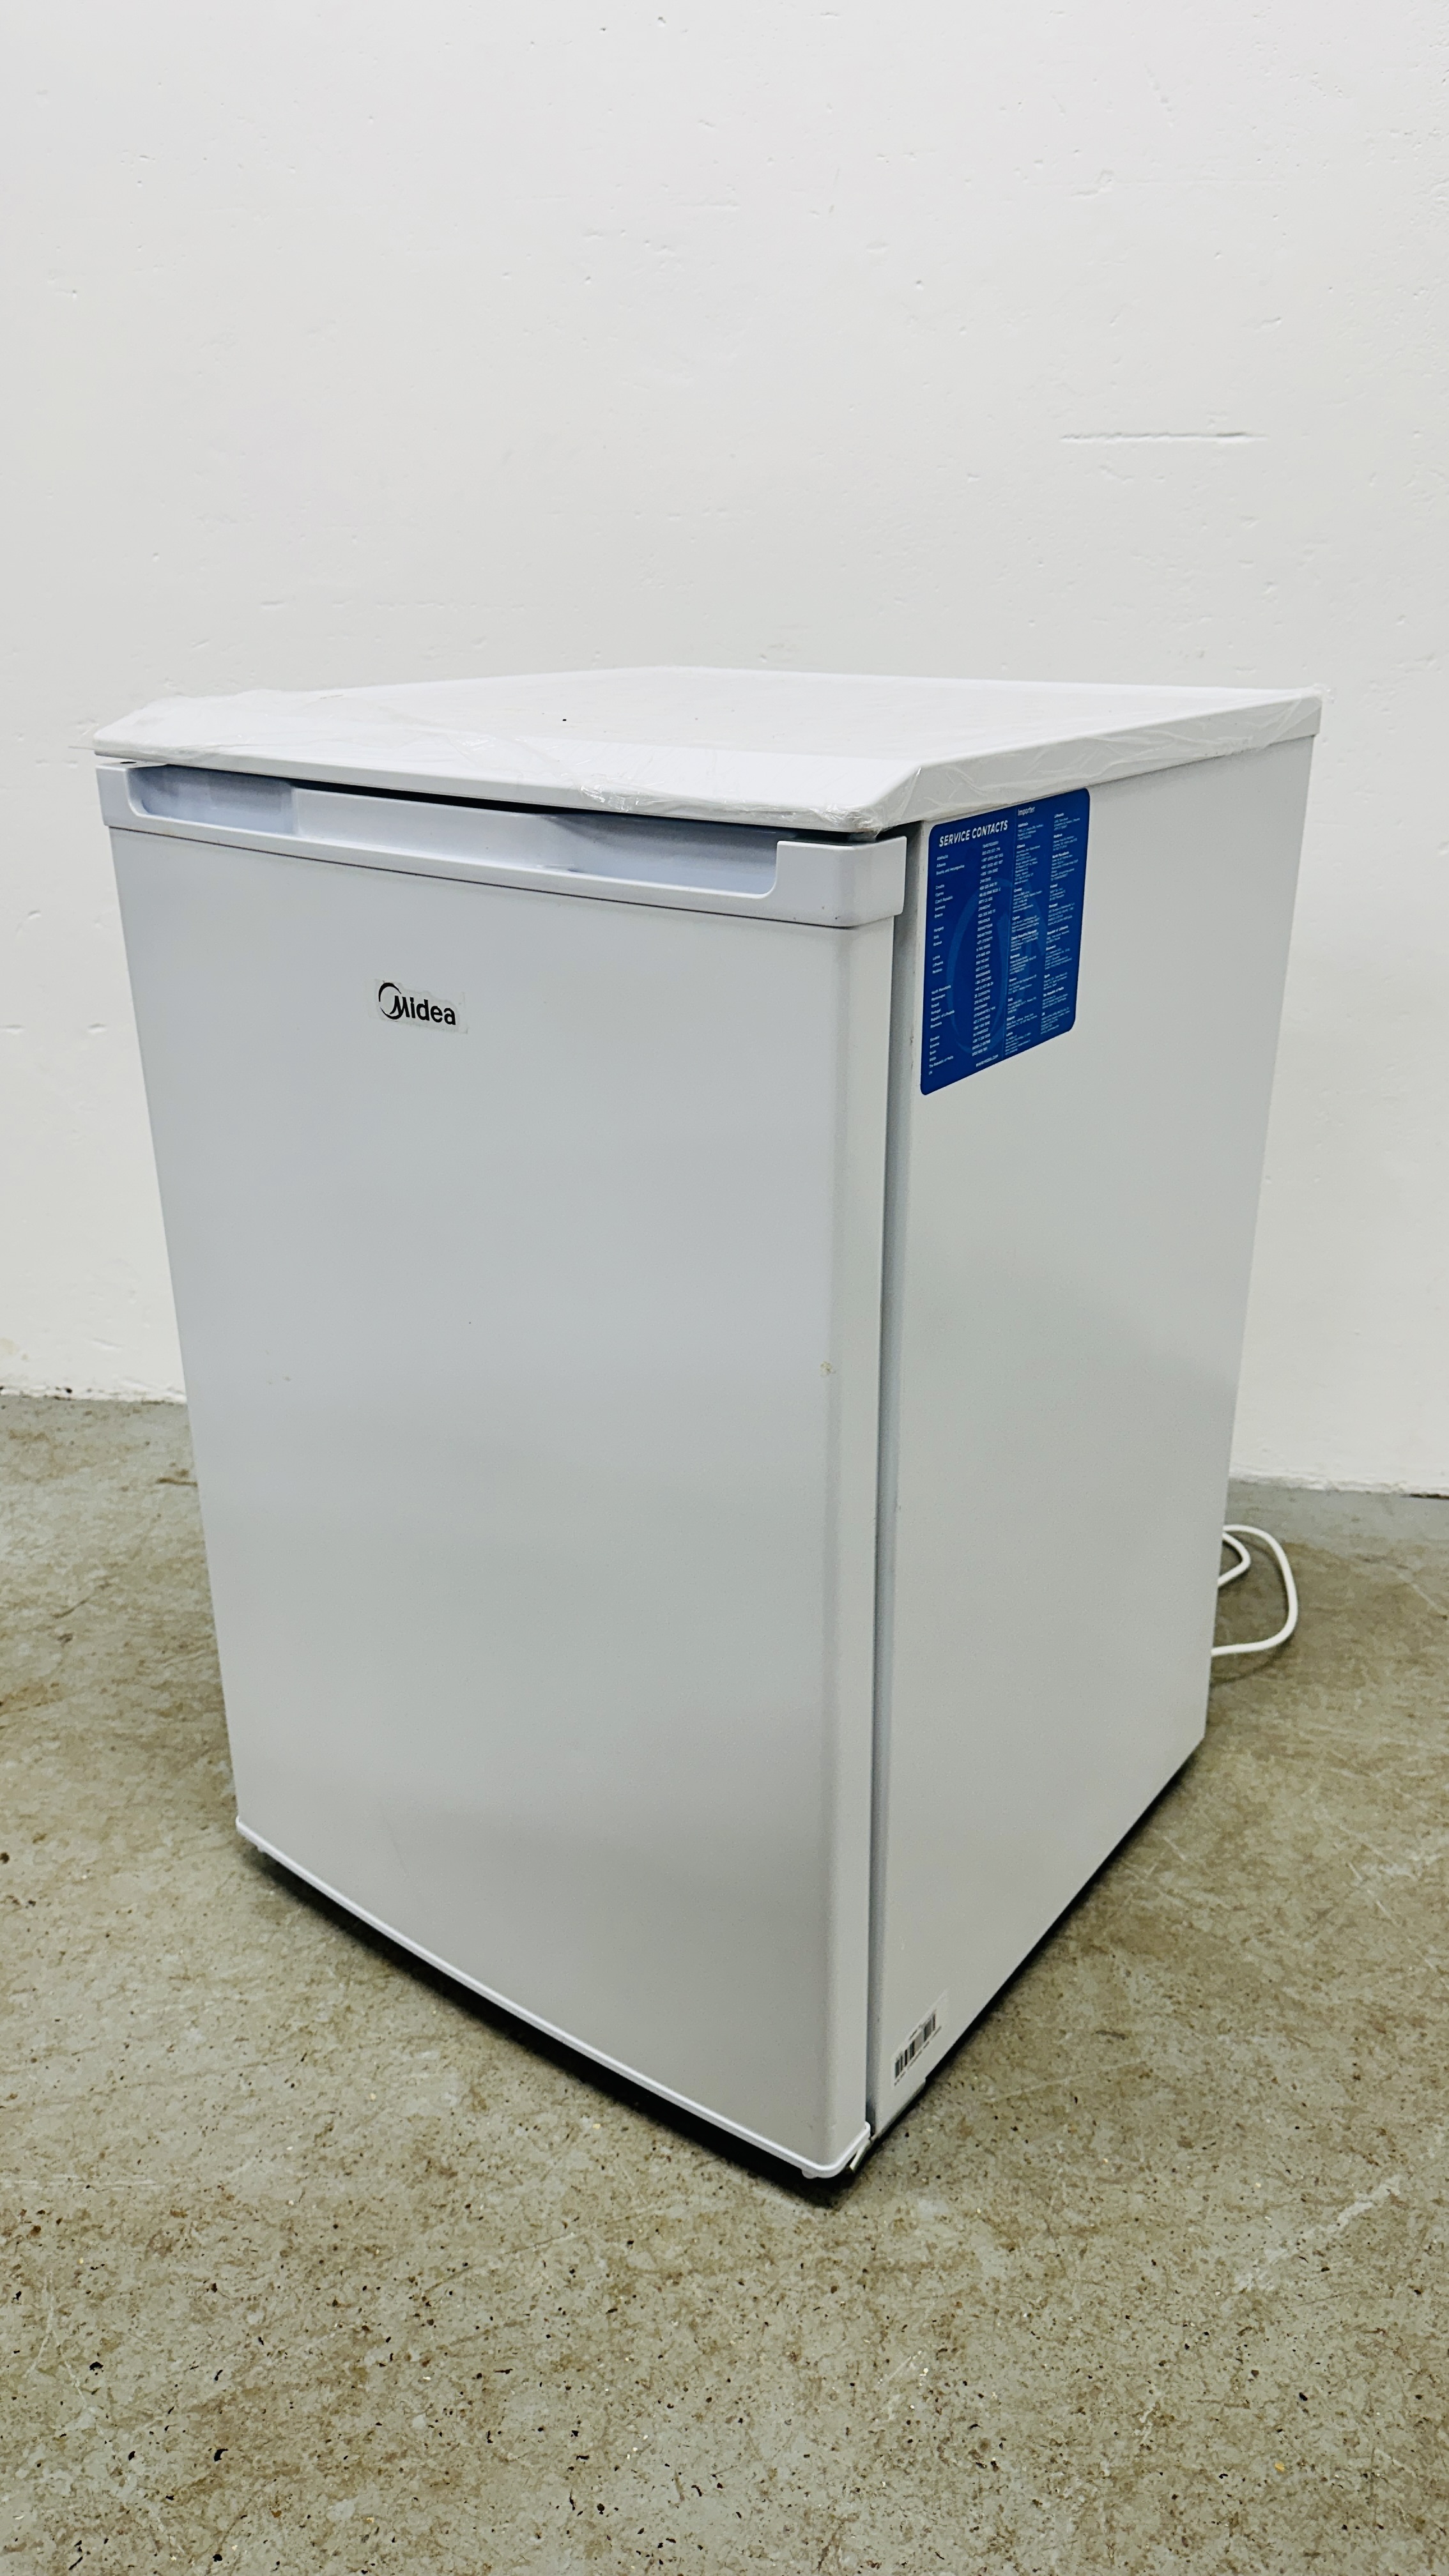 MEDIA UNDER COUNTER FRIDGE MODEL MDRD194FGF01 - SOLD AS SEEN. - Image 4 of 6